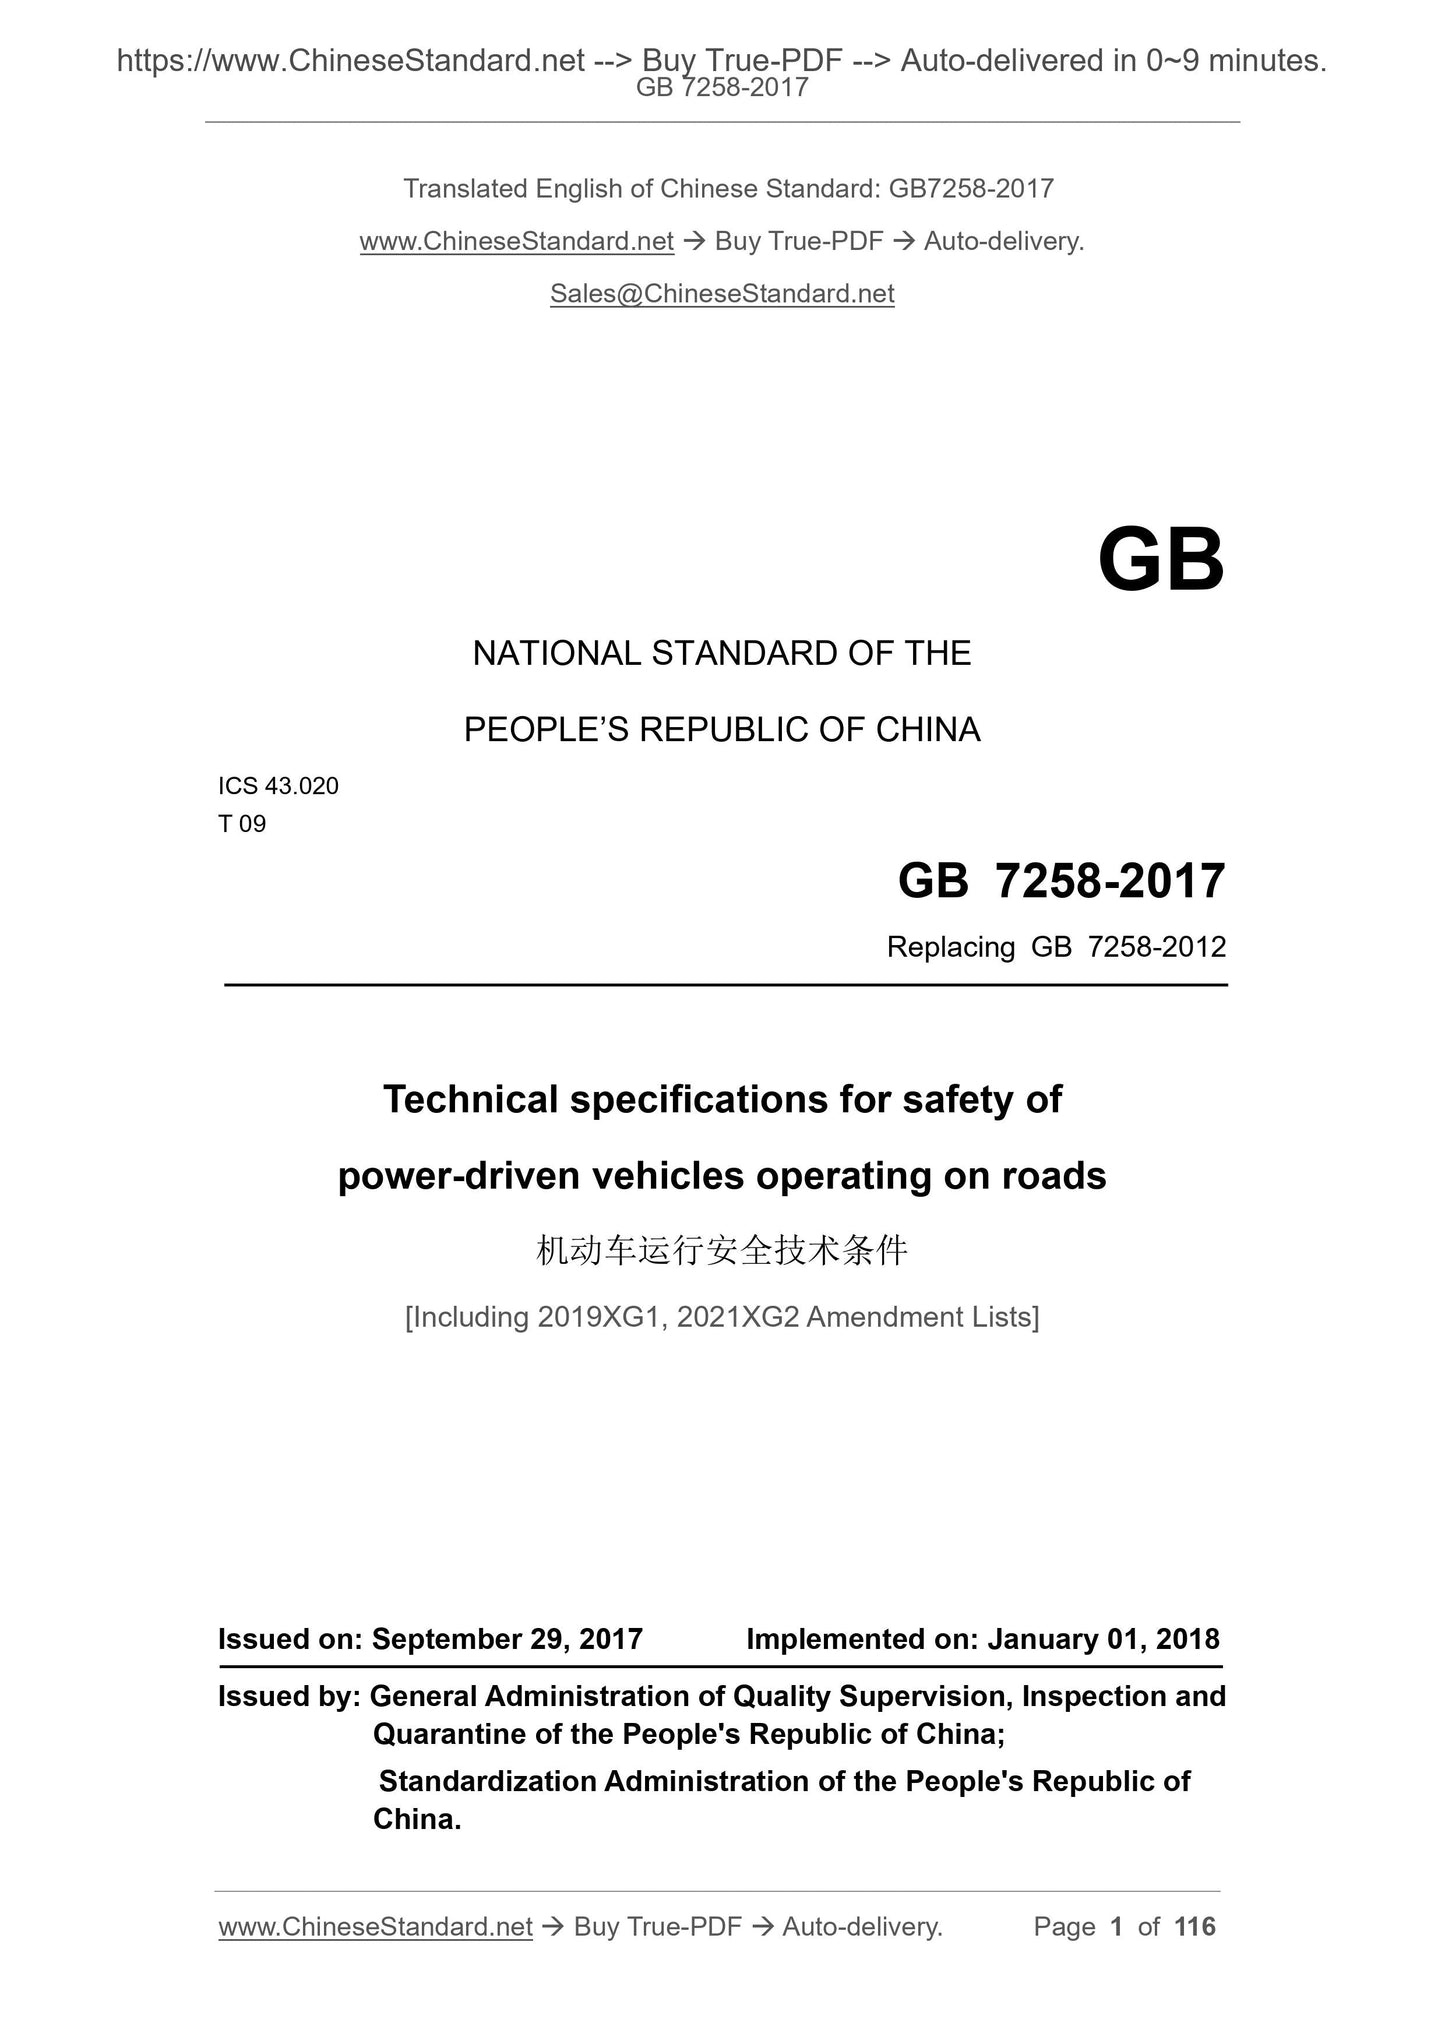 GB 7258-2017 Page 1